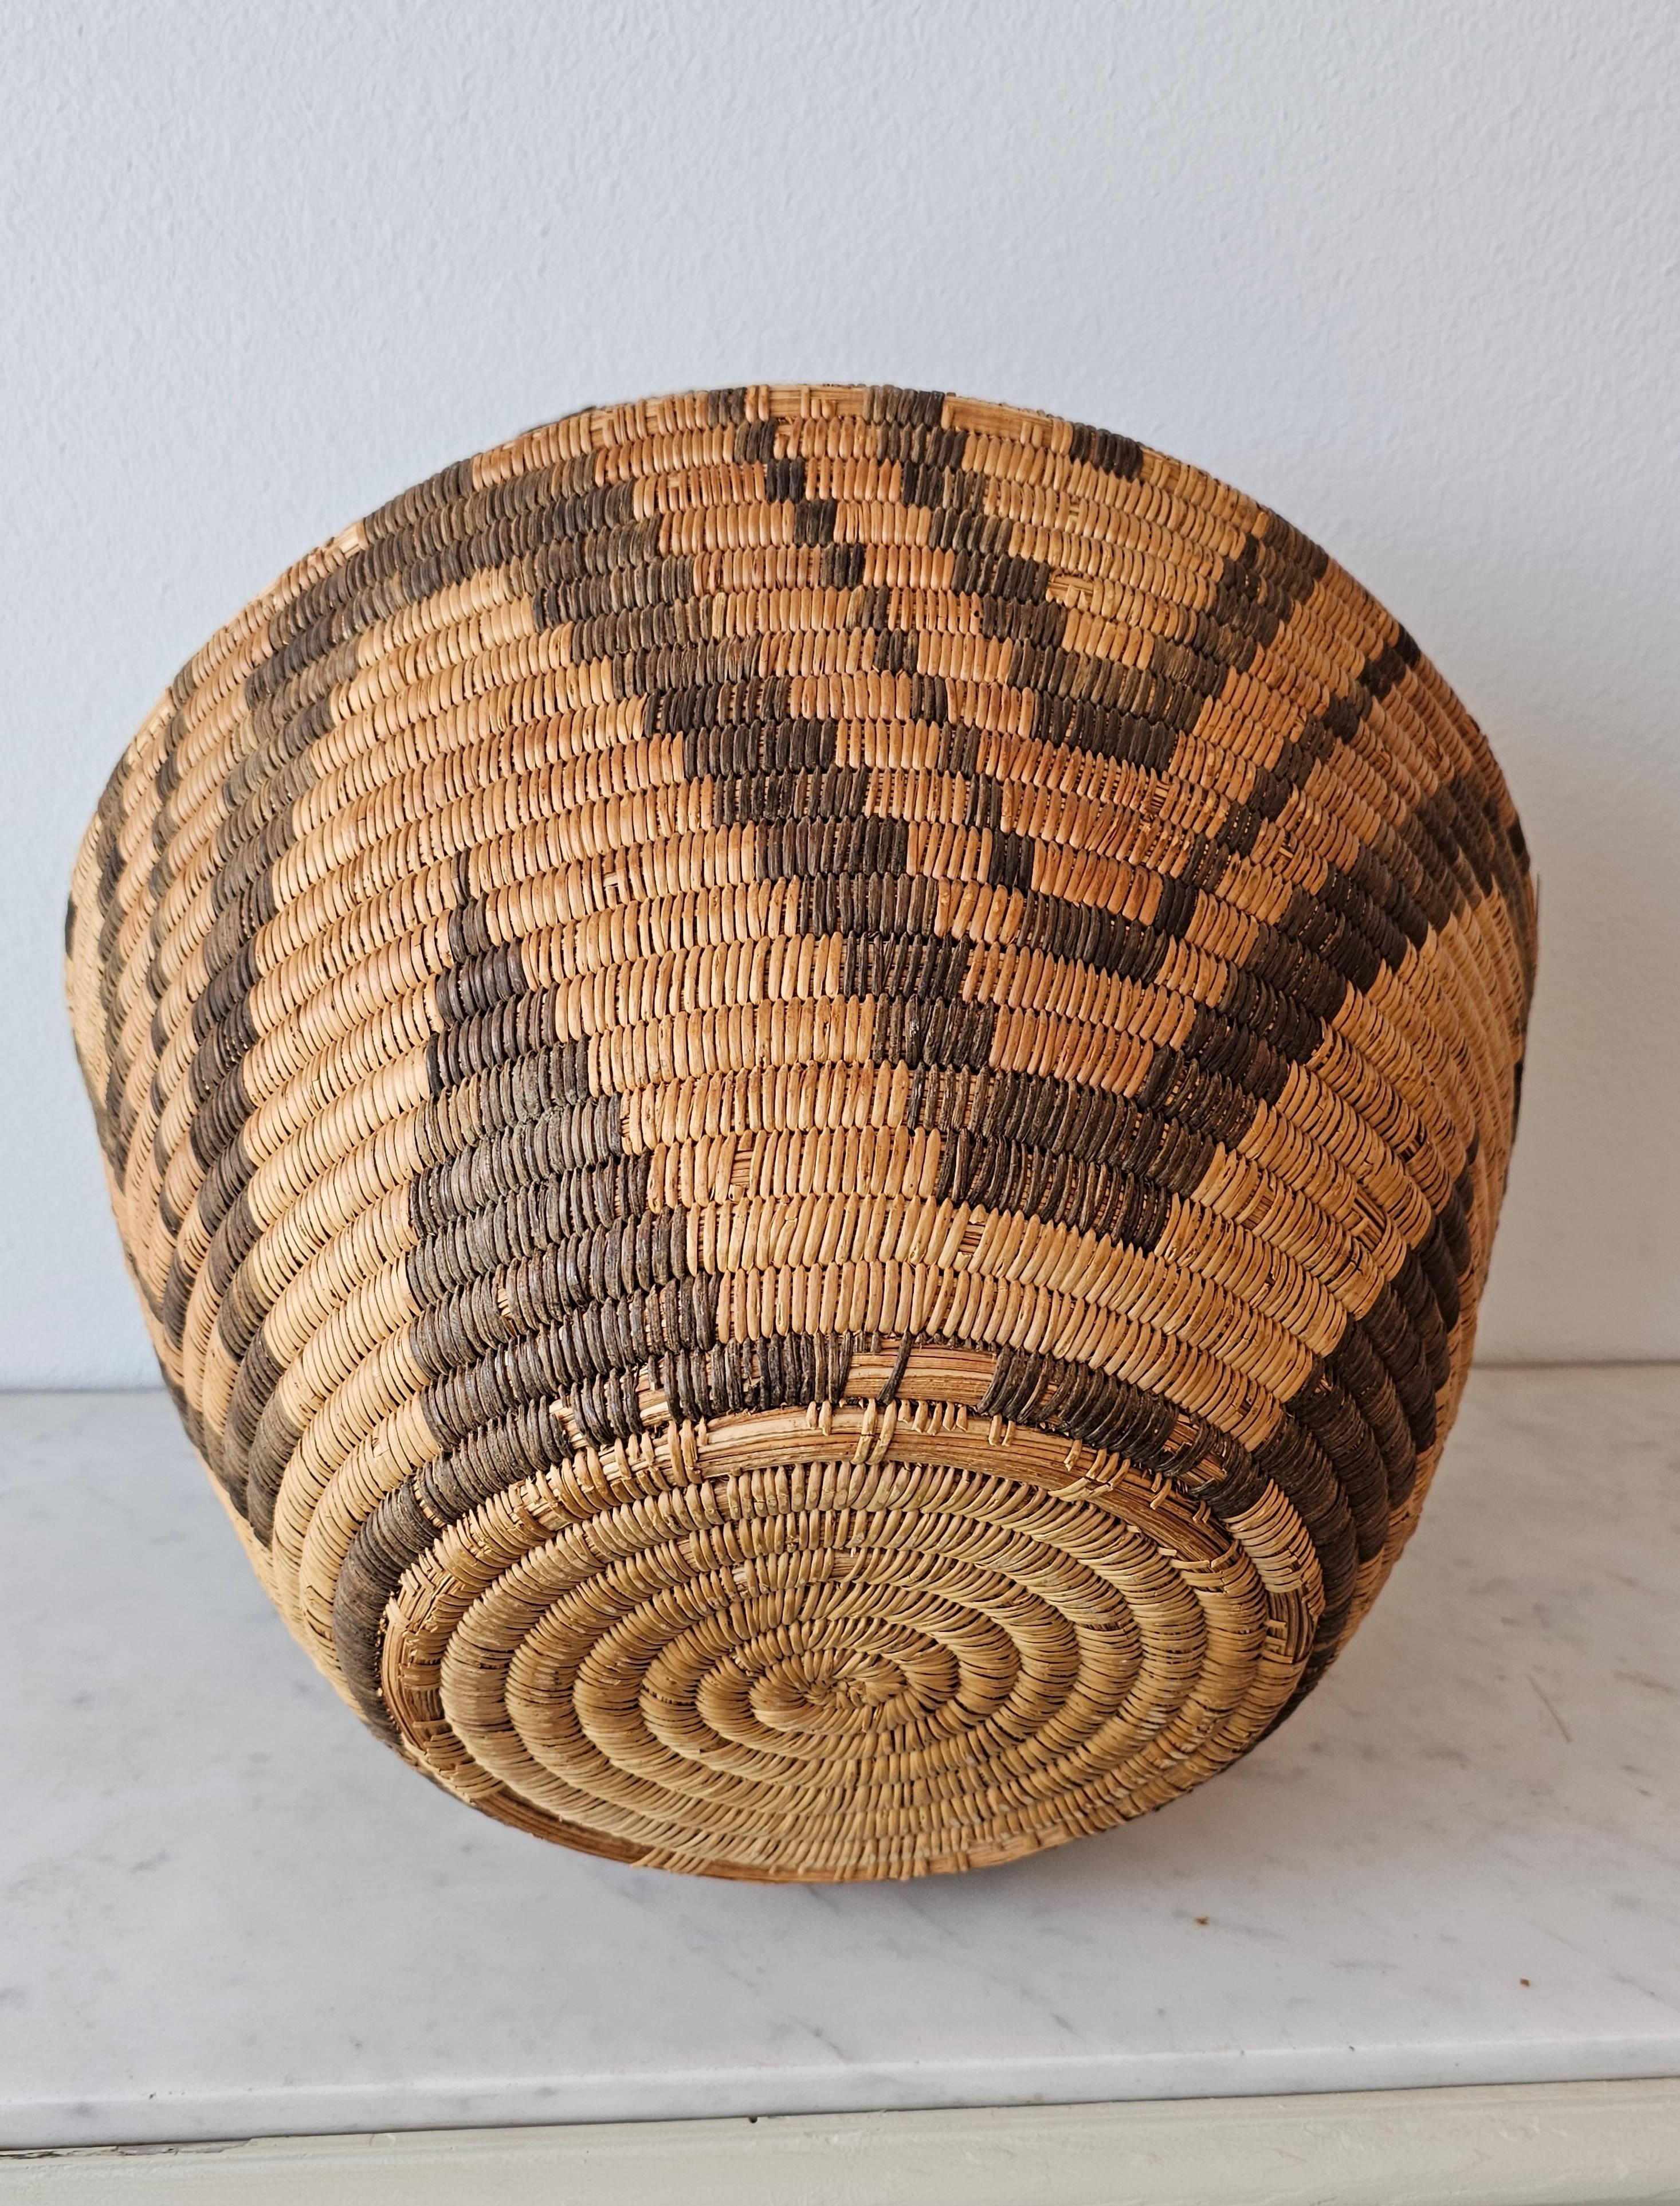 Antique Apache Olla Jar Coiled Willow Wicker Devil's Claw Basket  For Sale 5